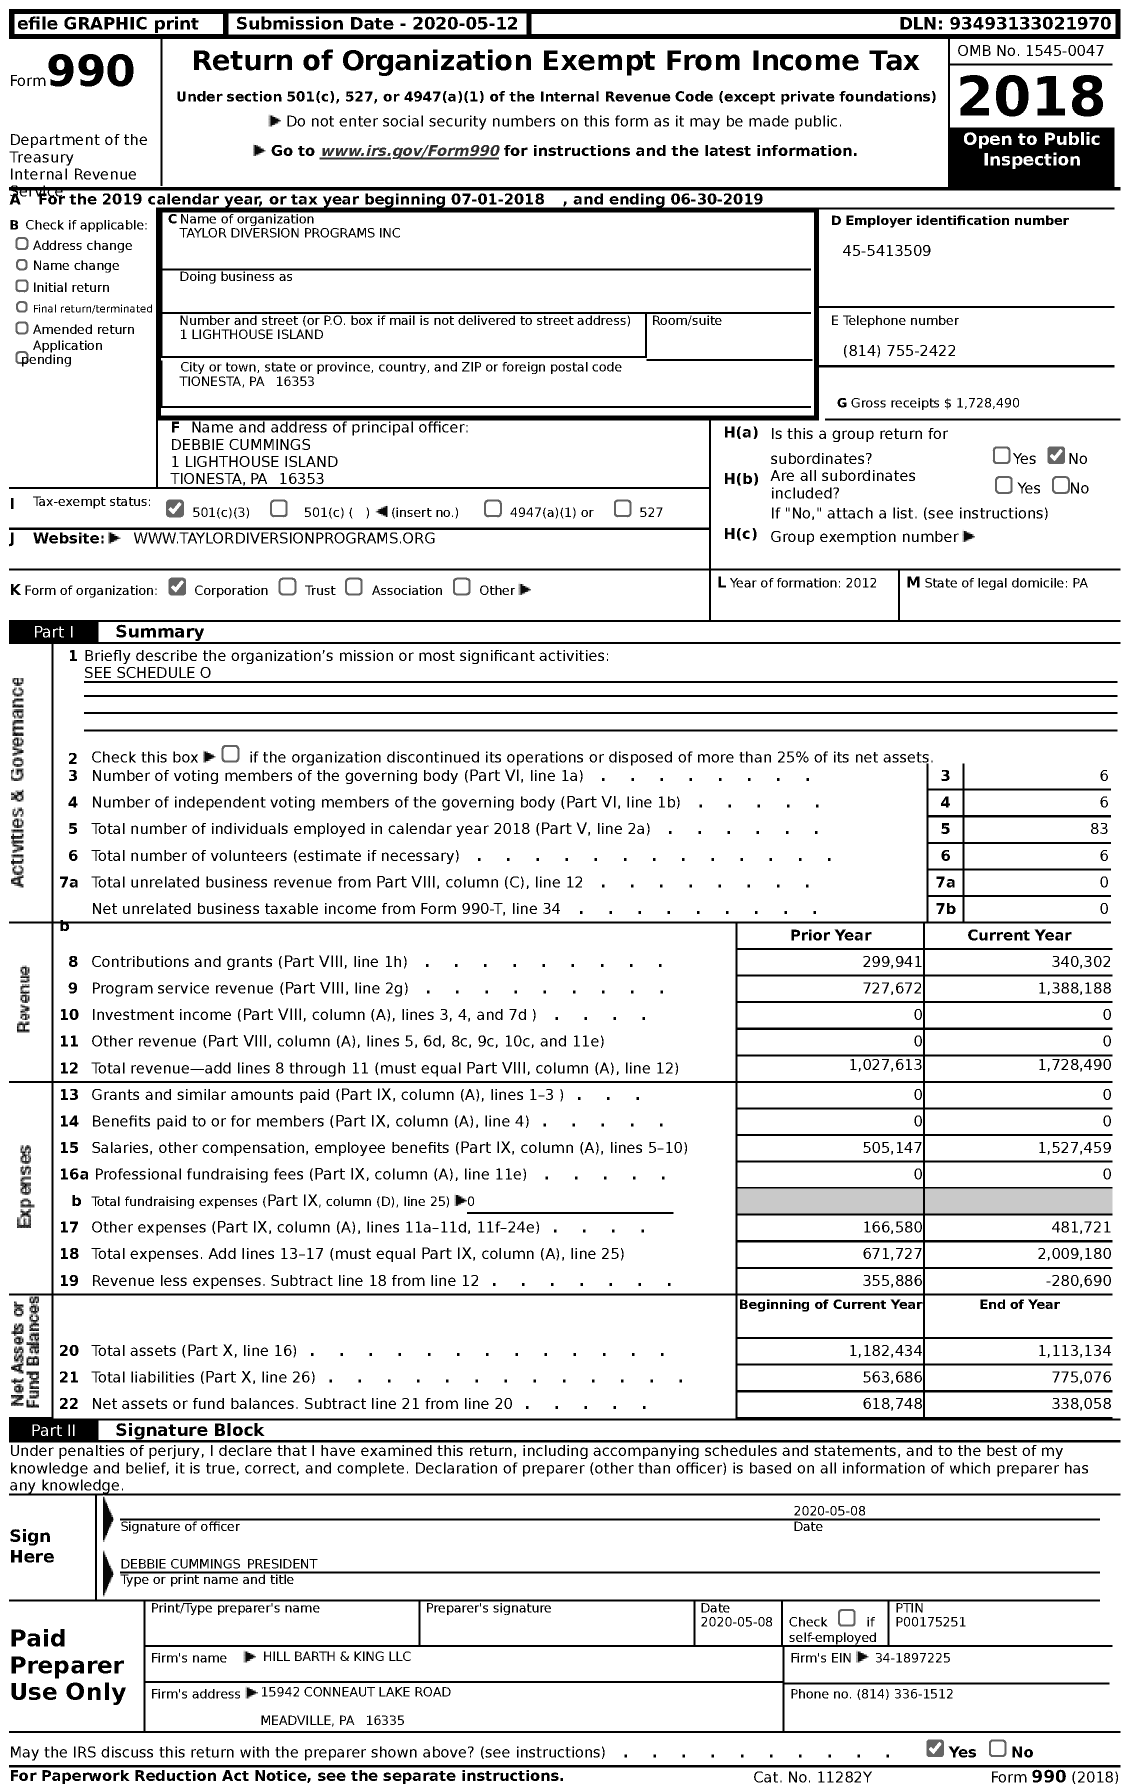 Image of first page of 2018 Form 990 for Taylor Diversion Programs